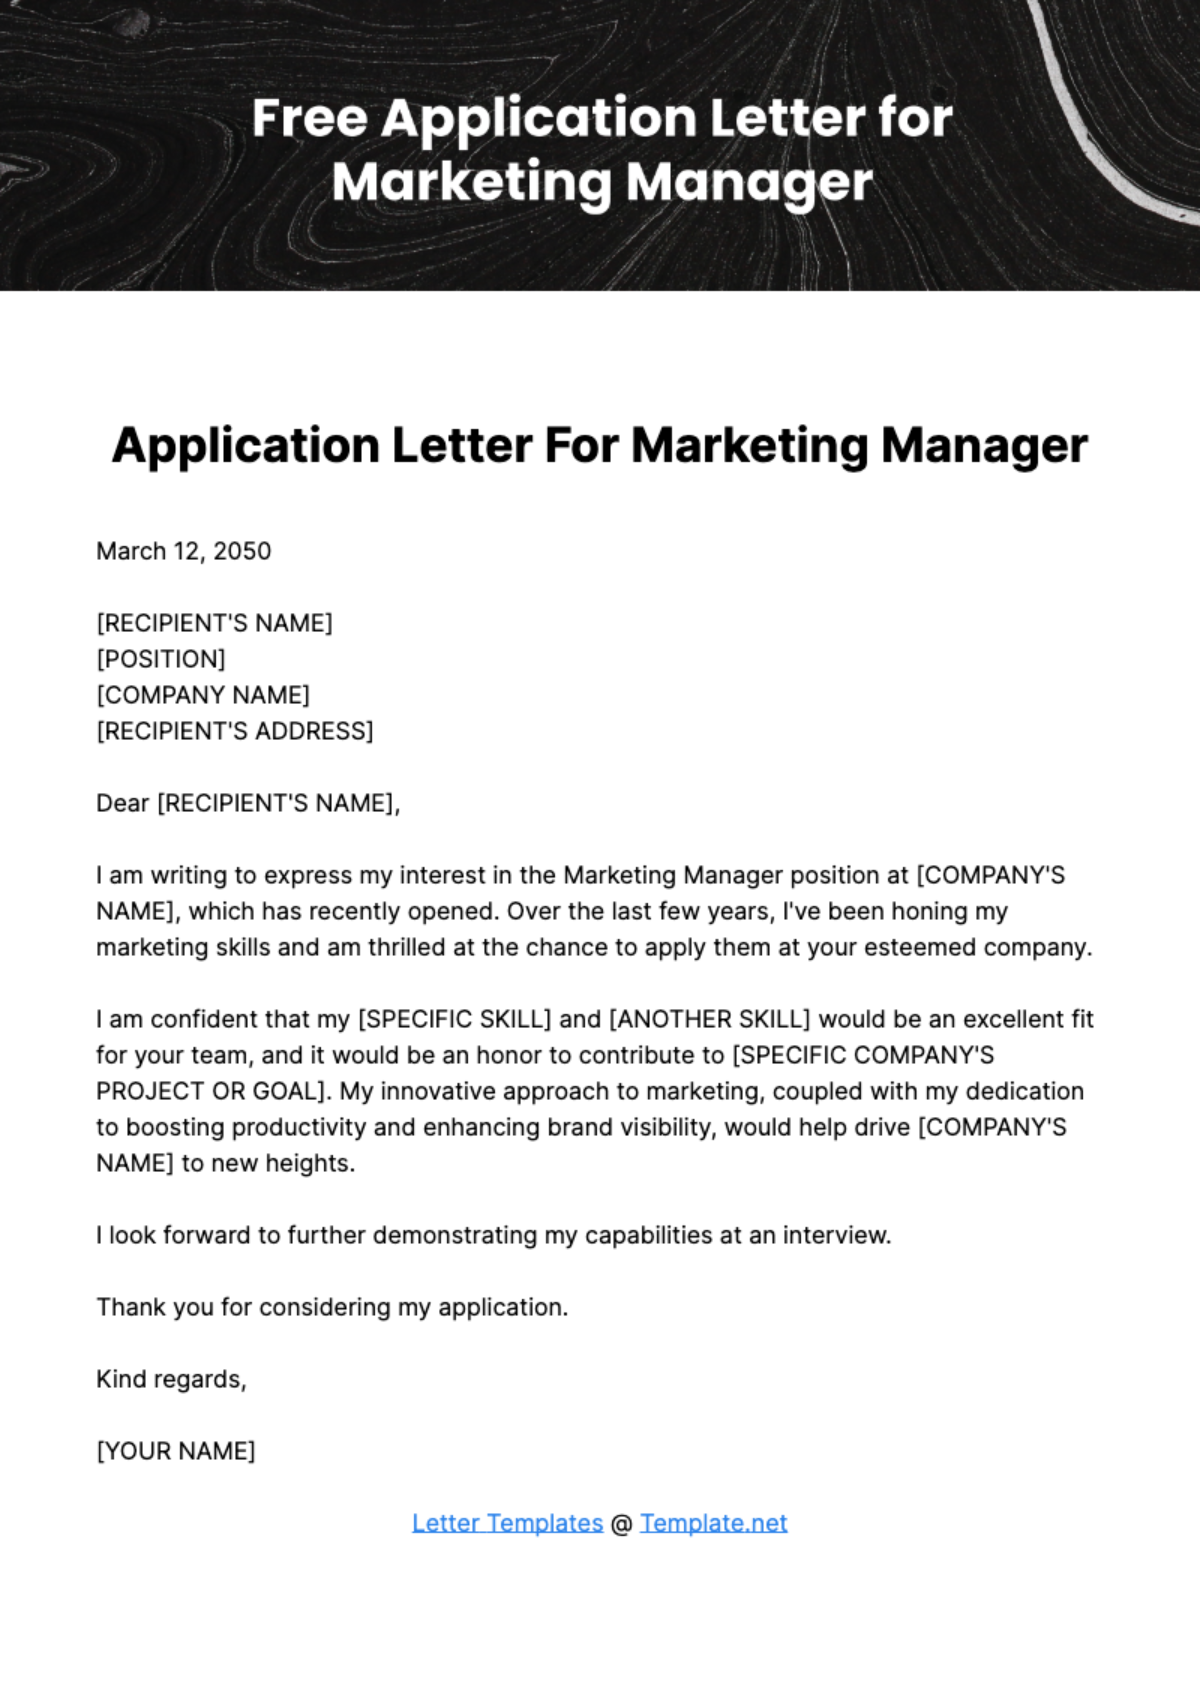 Free Application Letter for Marketing Manager Template